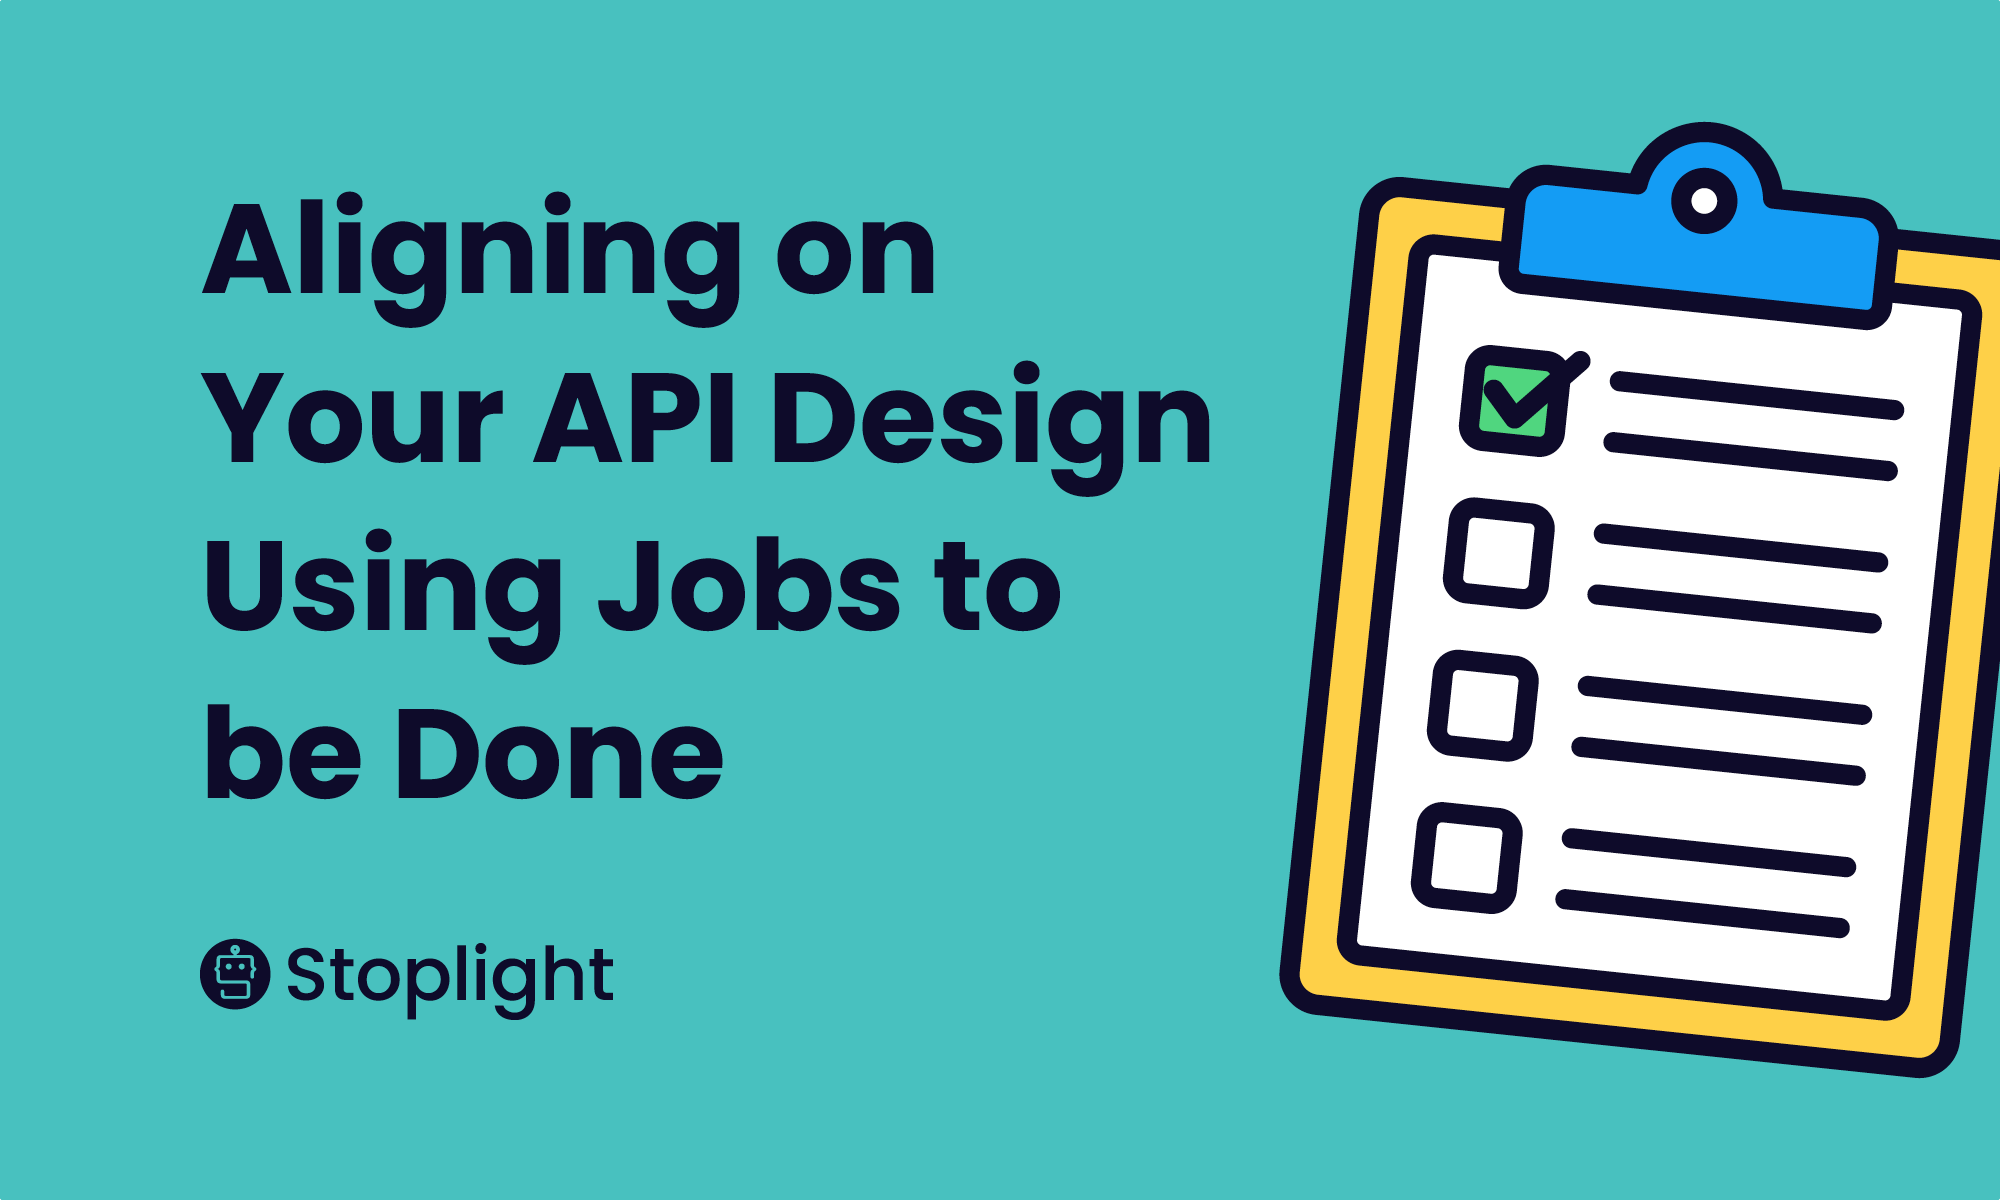 Aligning on Your API Design Using Jobs to Be Done